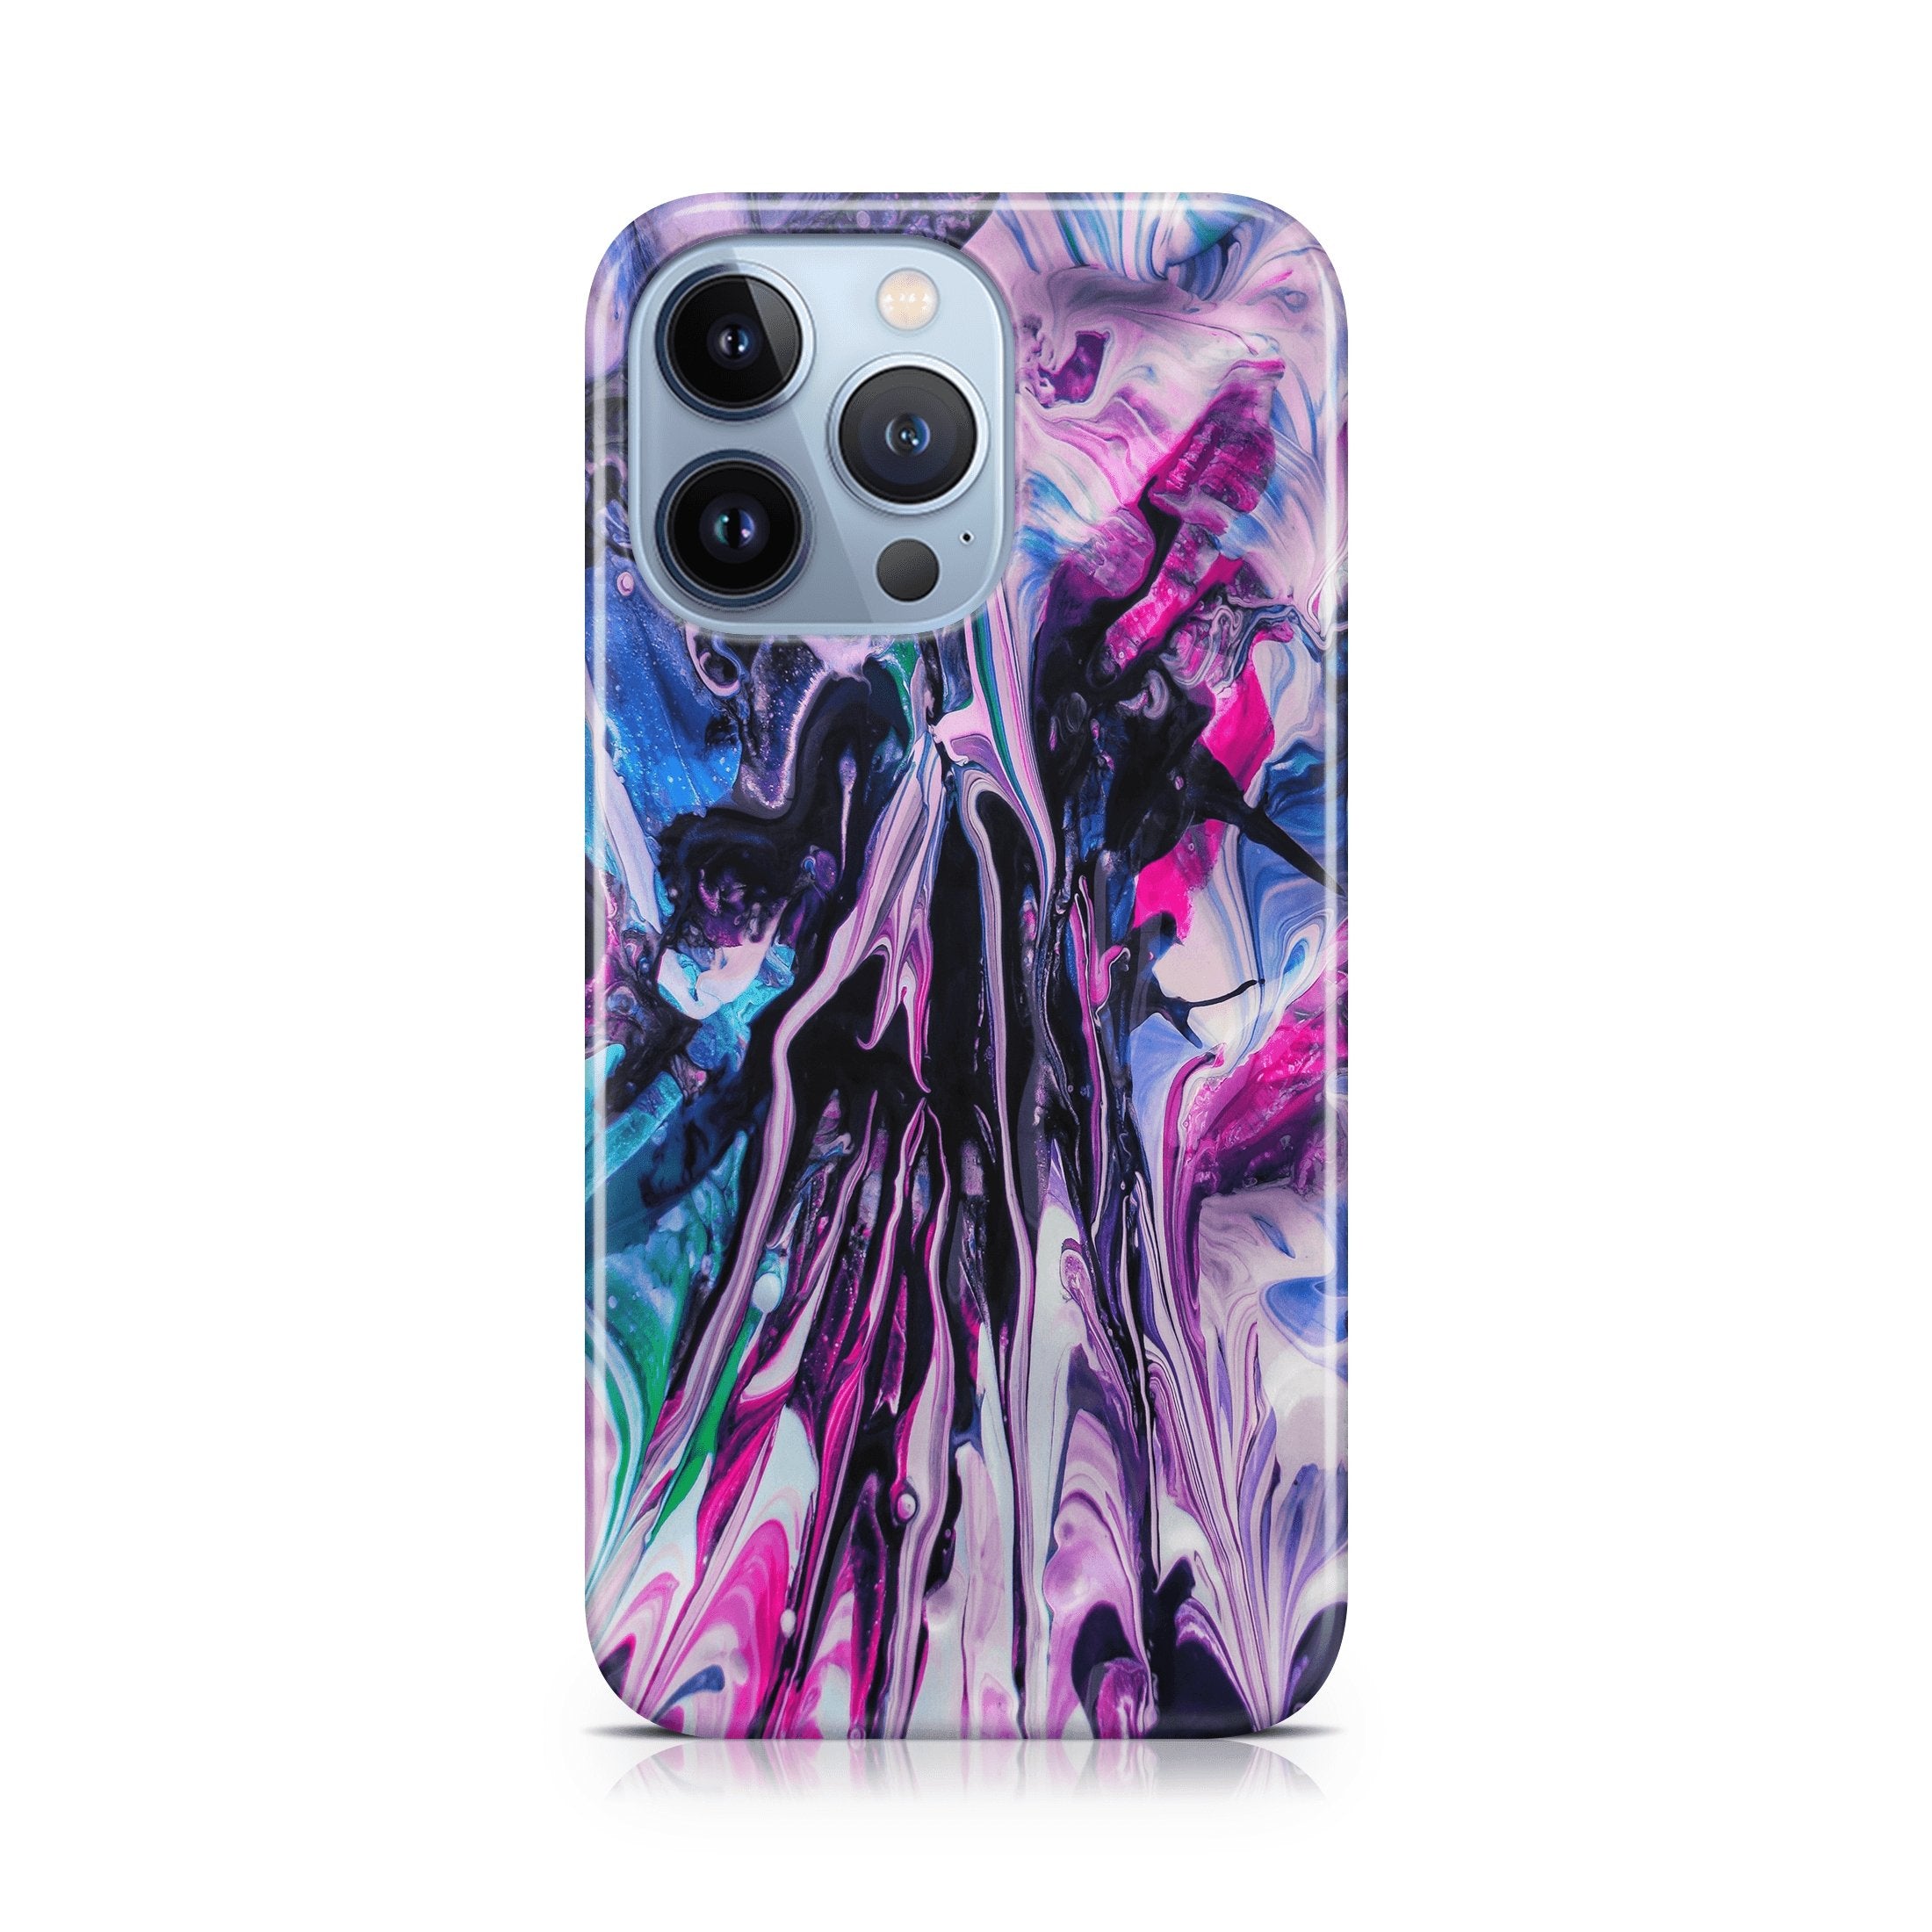 Fluid Acrylic Chaos - iPhone phone case designs by CaseSwagger